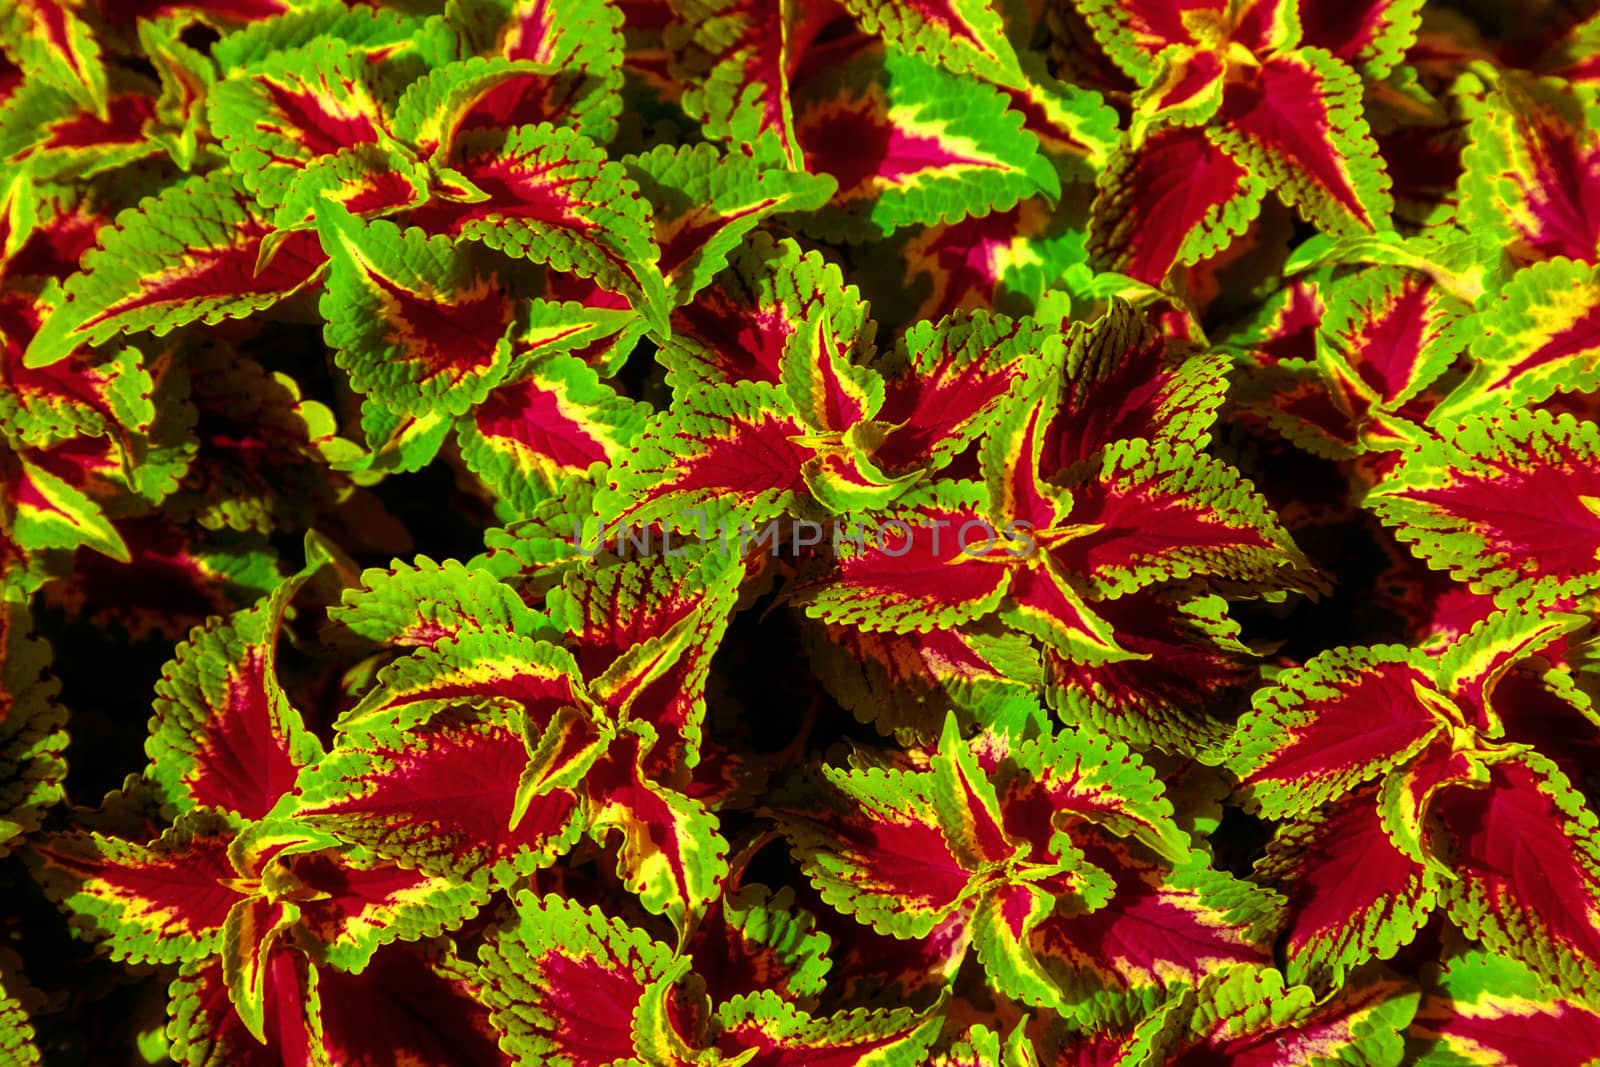 Decorative lawn leaves, Creative layout made of green and red foliage, abstract nature background